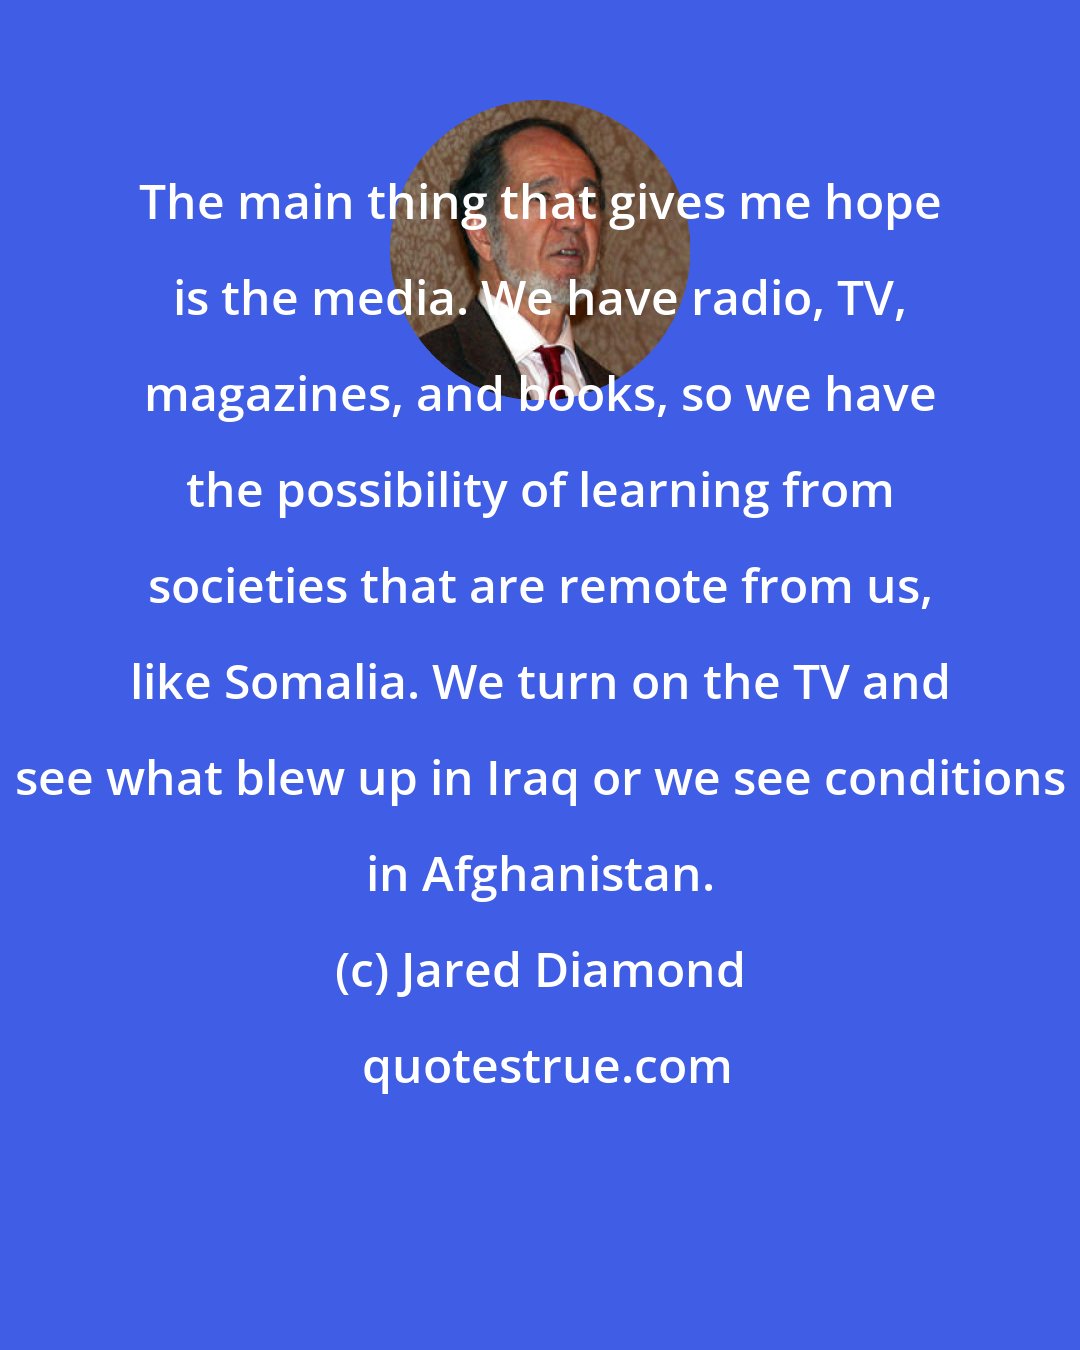 Jared Diamond: The main thing that gives me hope is the media. We have radio, TV, magazines, and books, so we have the possibility of learning from societies that are remote from us, like Somalia. We turn on the TV and see what blew up in Iraq or we see conditions in Afghanistan.